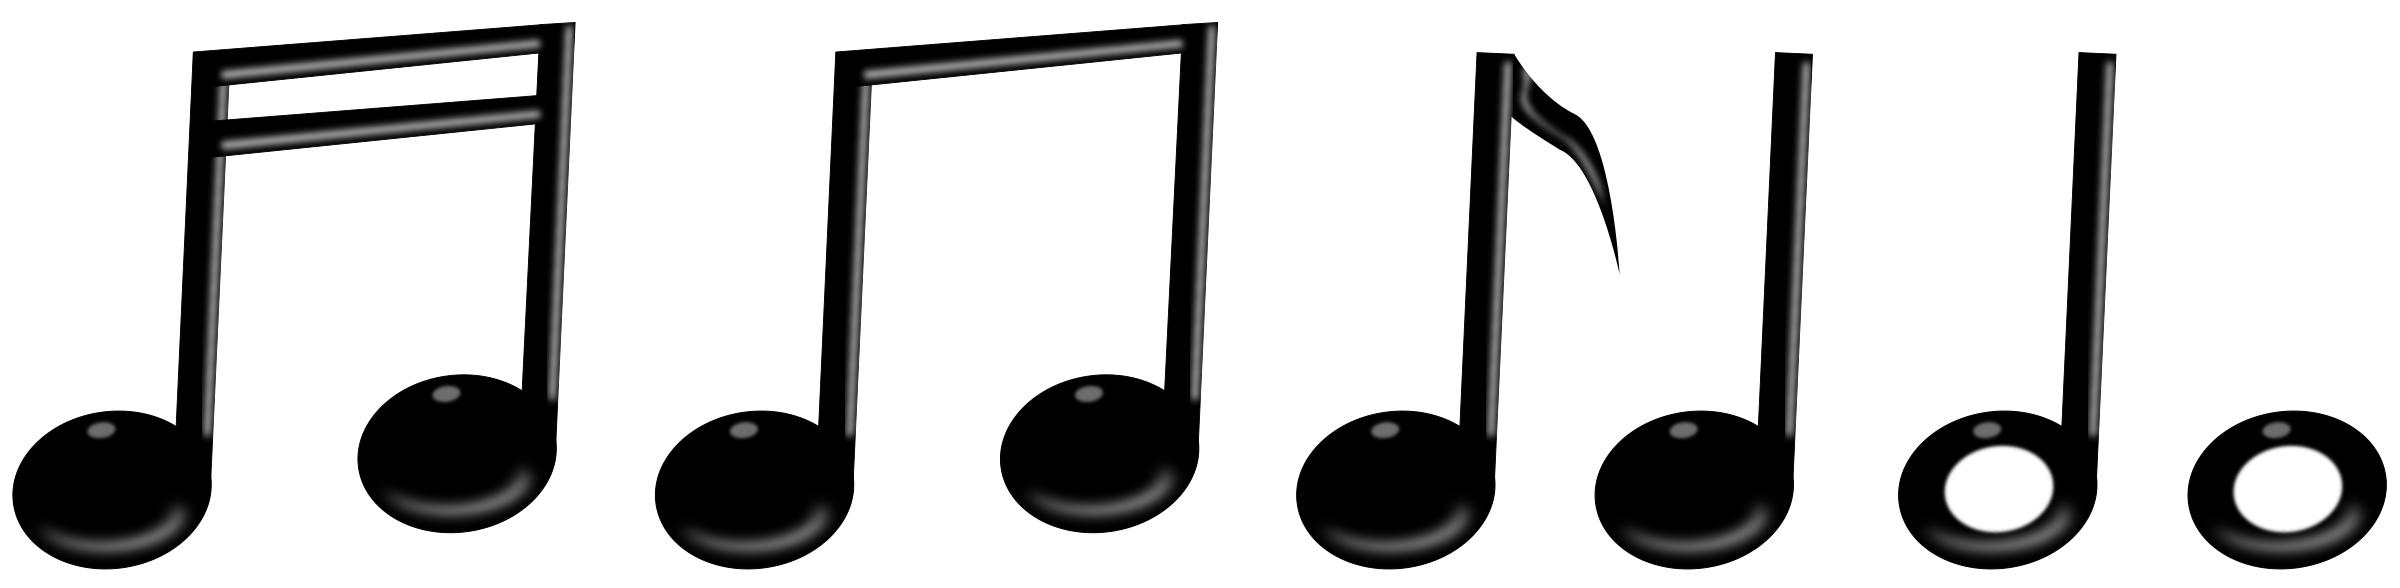 Music notes. Notas musicales png